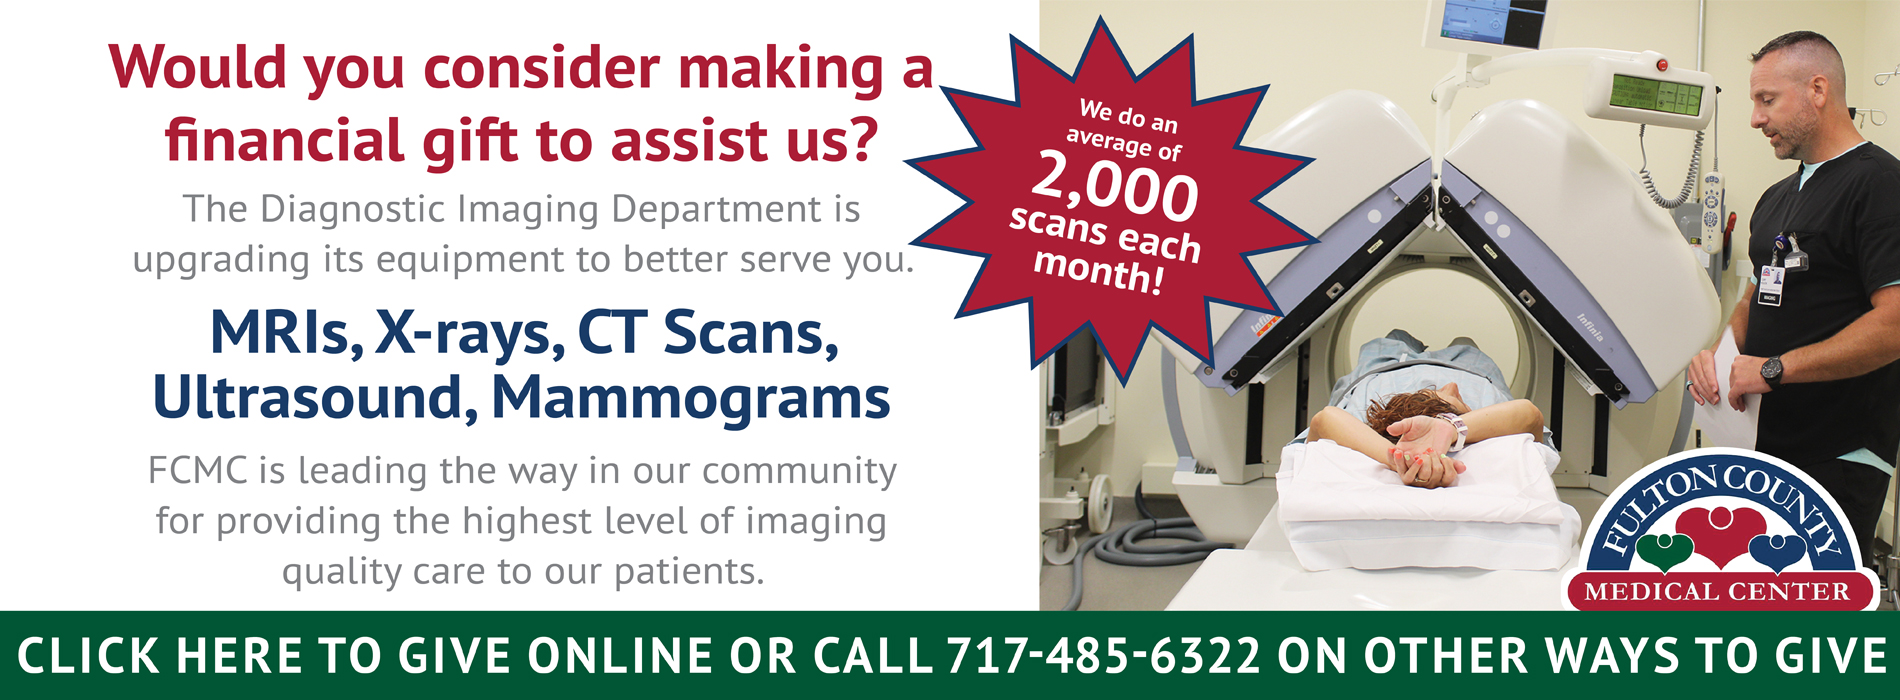 Fulton County is upgrading it equipment for MRIs, X-rays CT scans, Ultrasound and mammograms